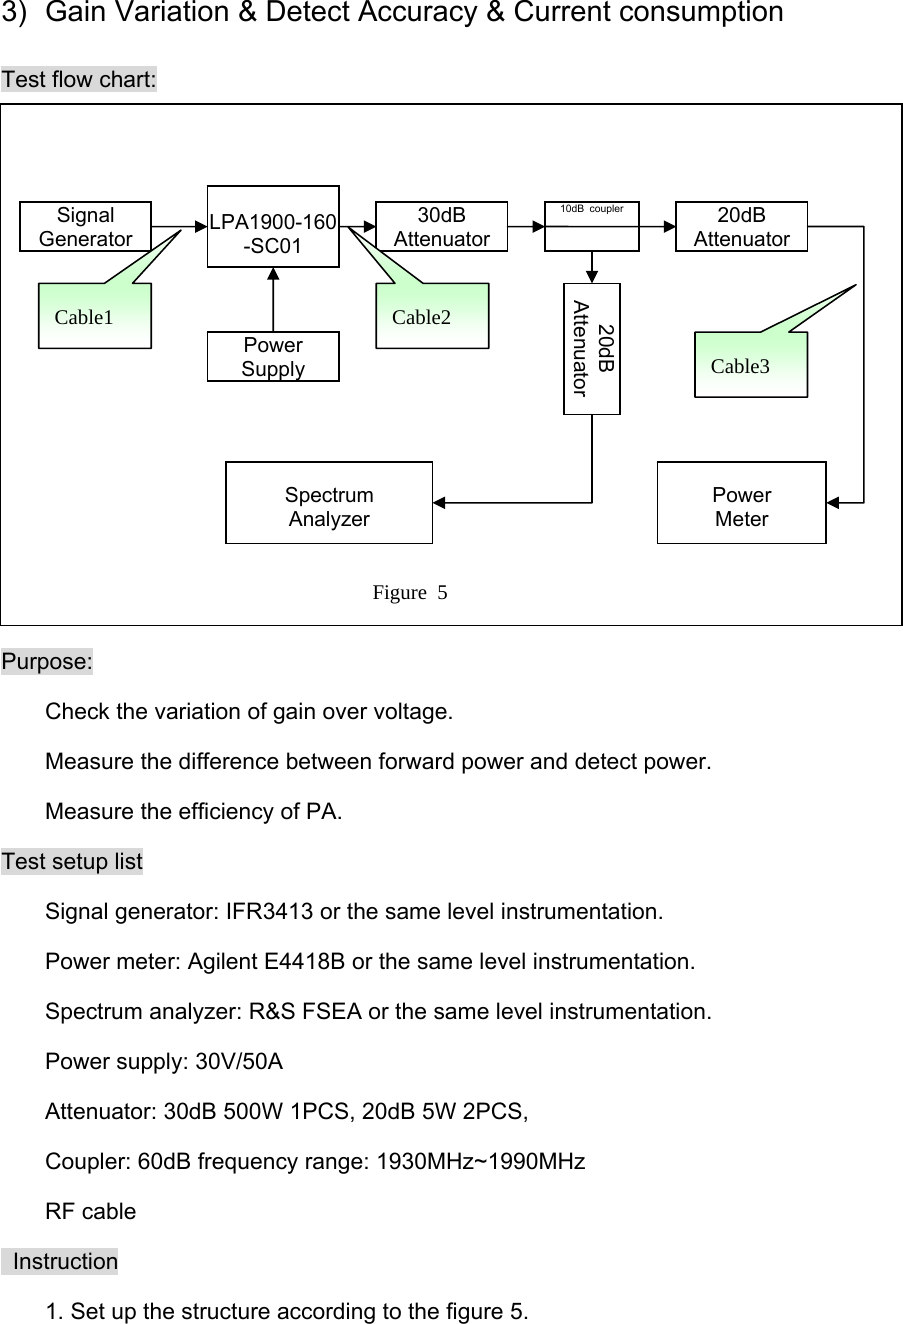 3)  Gain Variation &amp; Detect Accuracy &amp; Current consumption Test flow chart:  Purpose:   Check the variation of gain over voltage.   Measure the difference between forward power and detect power.   Measure the efficiency of PA. Test setup list   Signal generator: IFR3413 or the same level instrumentation.     Power meter: Agilent E4418B or the same level instrumentation.   Spectrum analyzer: R&amp;S FSEA or the same level instrumentation.   Power supply: 30V/50A   Attenuator: 30dB 500W 1PCS, 20dB 5W 2PCS,     Coupler: 60dB frequency range: 1930MHz~1990MHz  RF cable  Instruction   1. Set up the structure according to the figure 5.   Signal Generator  LPA1900-160-SC01 10dB coupler 30dB Attenuator20dB Attenuator 20dB AttenuatorPower Supply Spectrum Analyzer Power Meter Figure 5 Cable1  Cable2 Cable3 